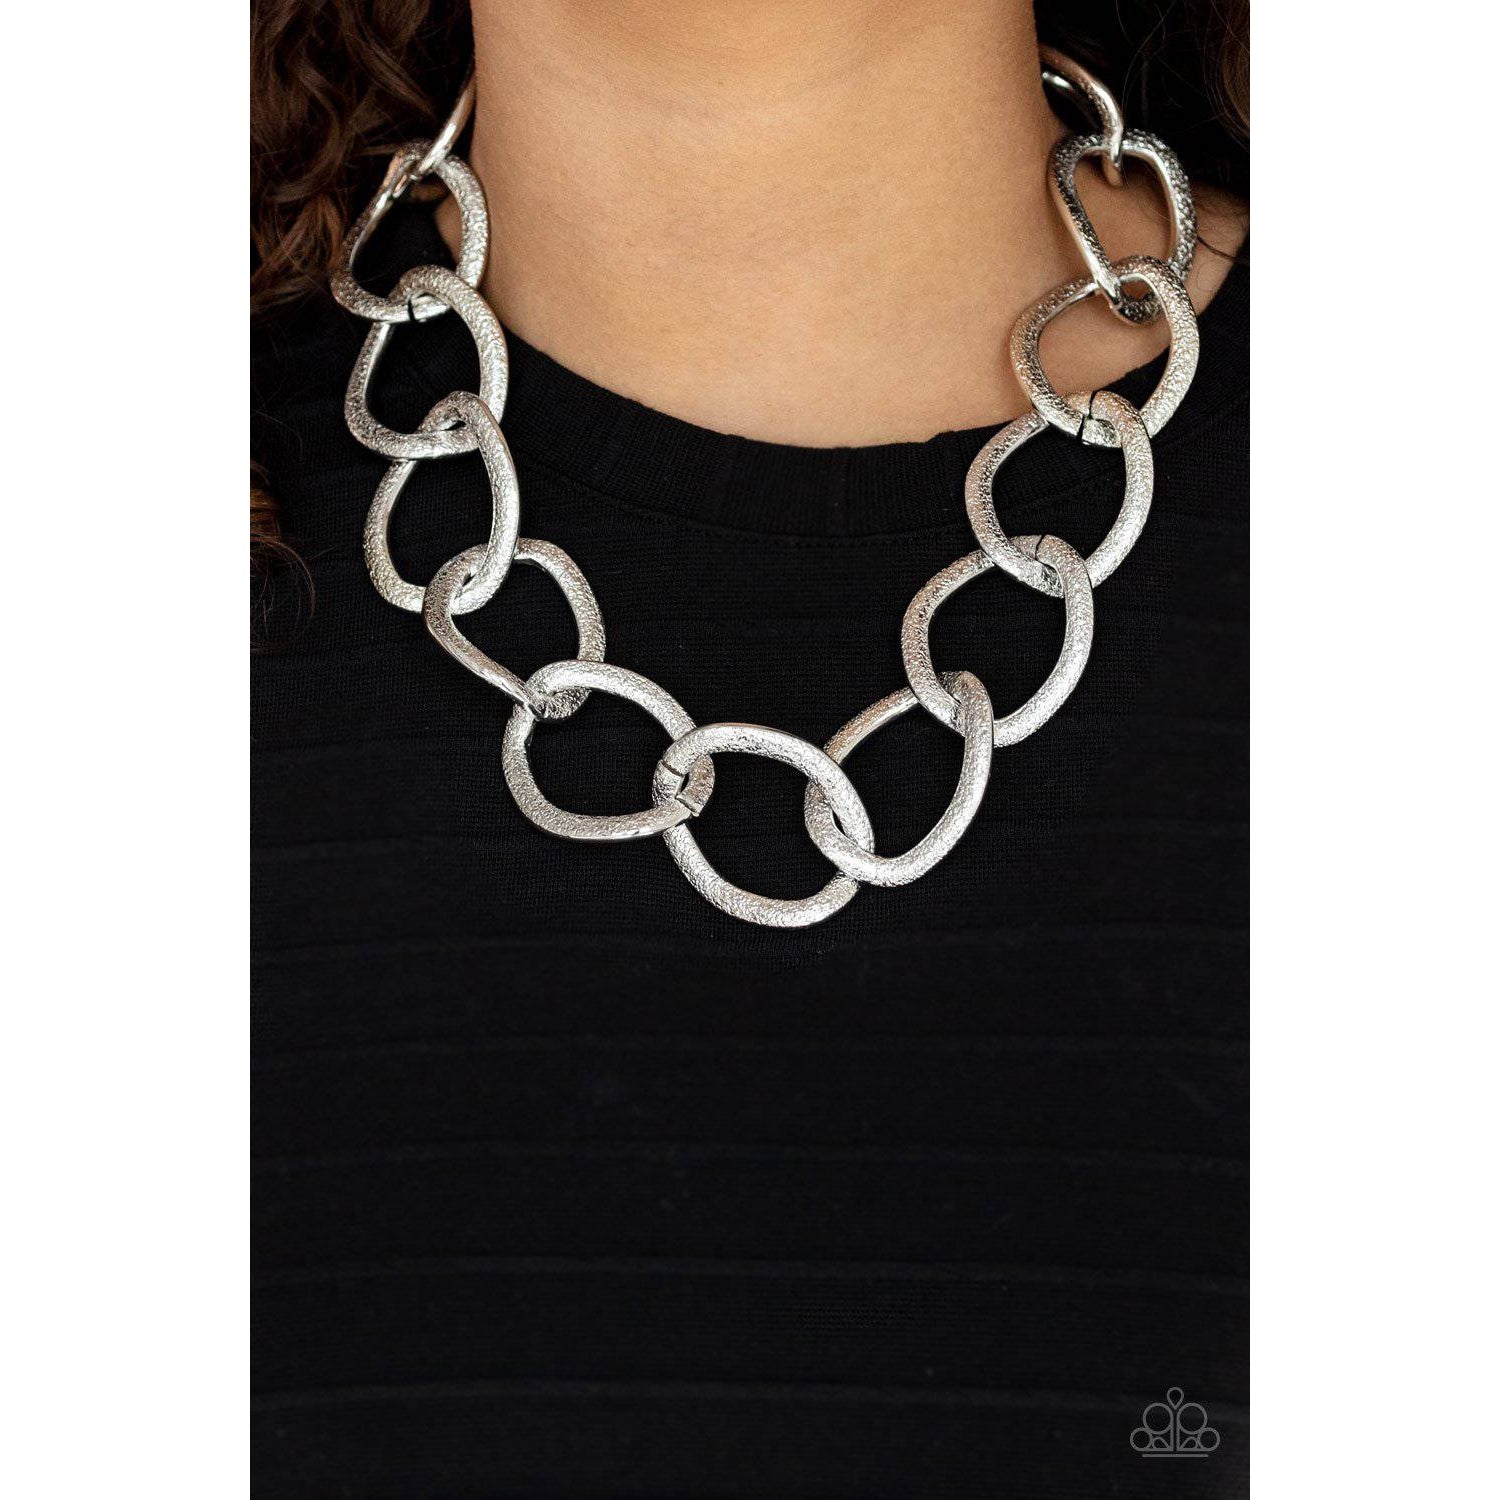 Industrial Intimidation - Silver Necklace - Paparazzi Accessories - GlaMarous Titi Jewels